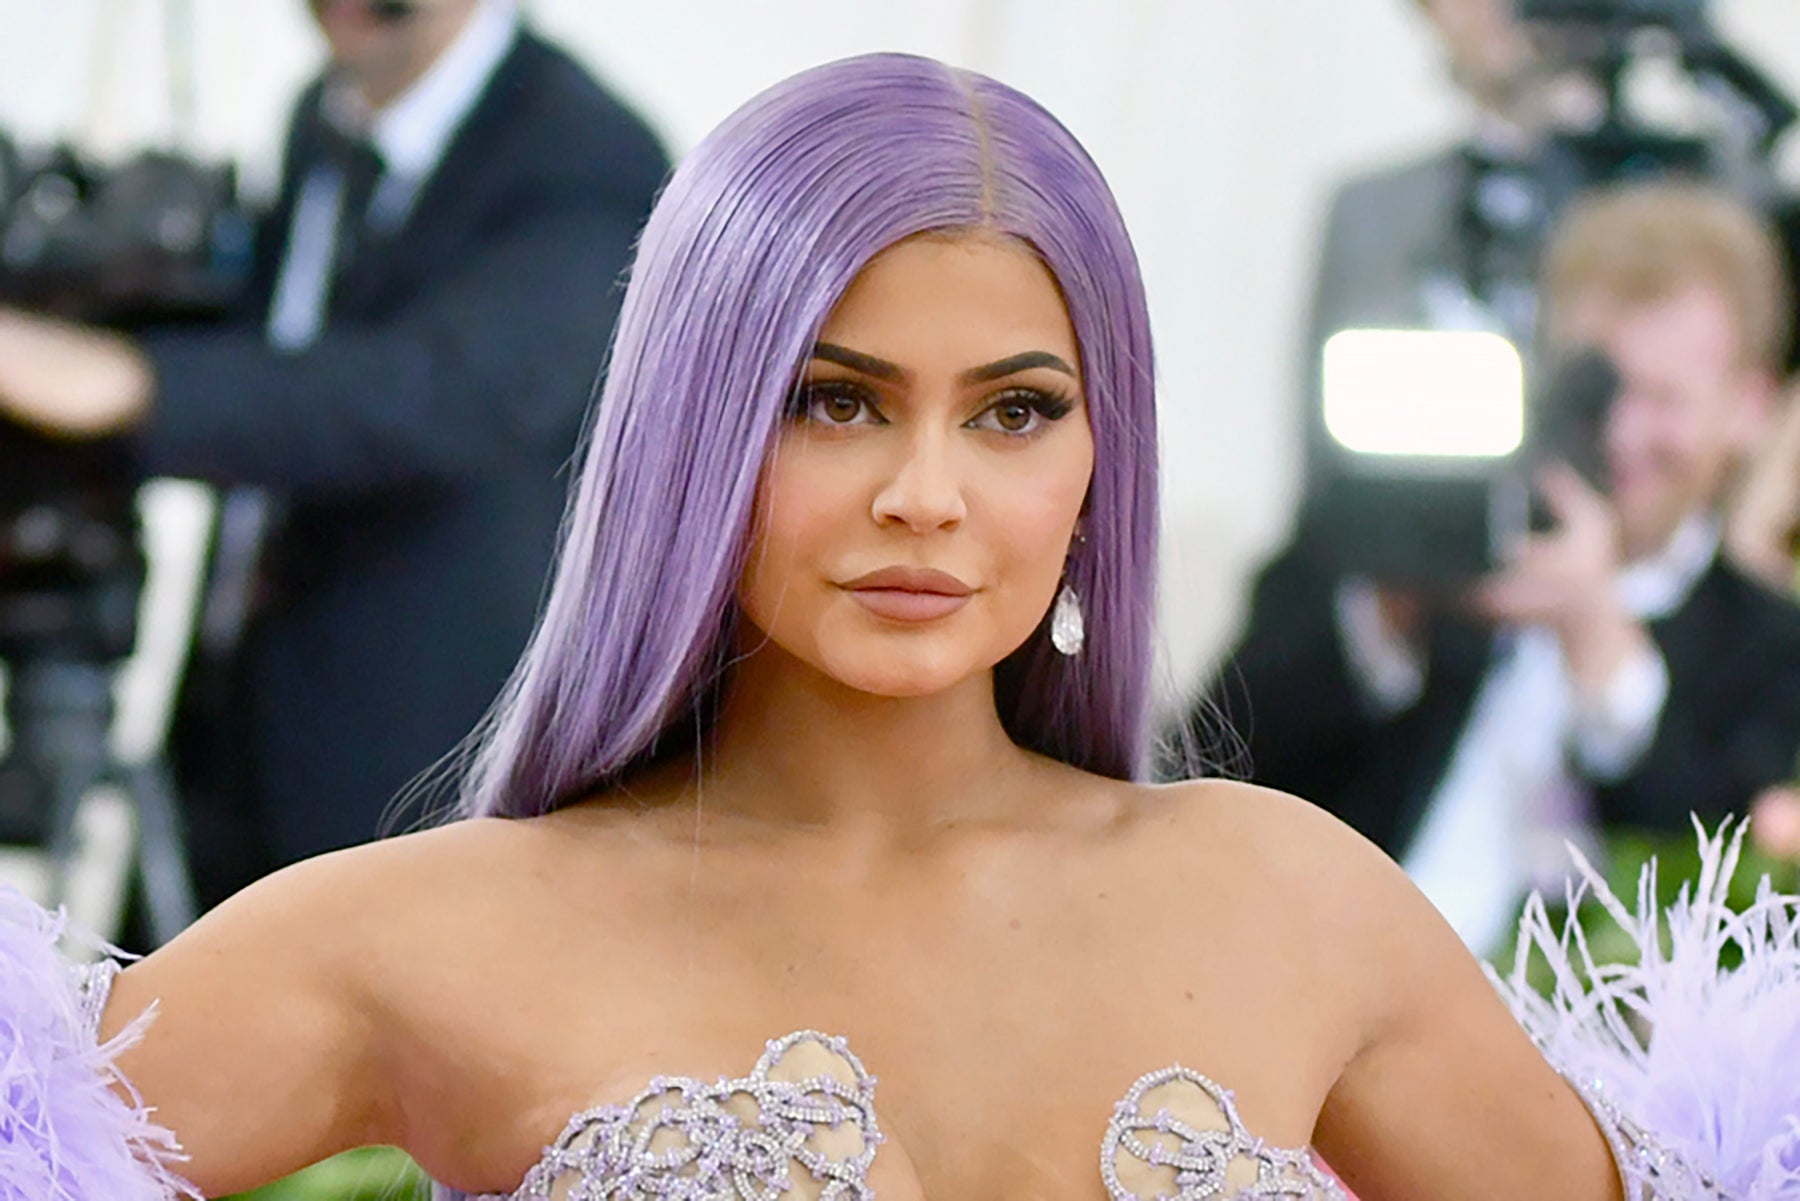 Kylie Jenner Reportedly In Talks To Re-Buy 51% Stake In Cosmetics